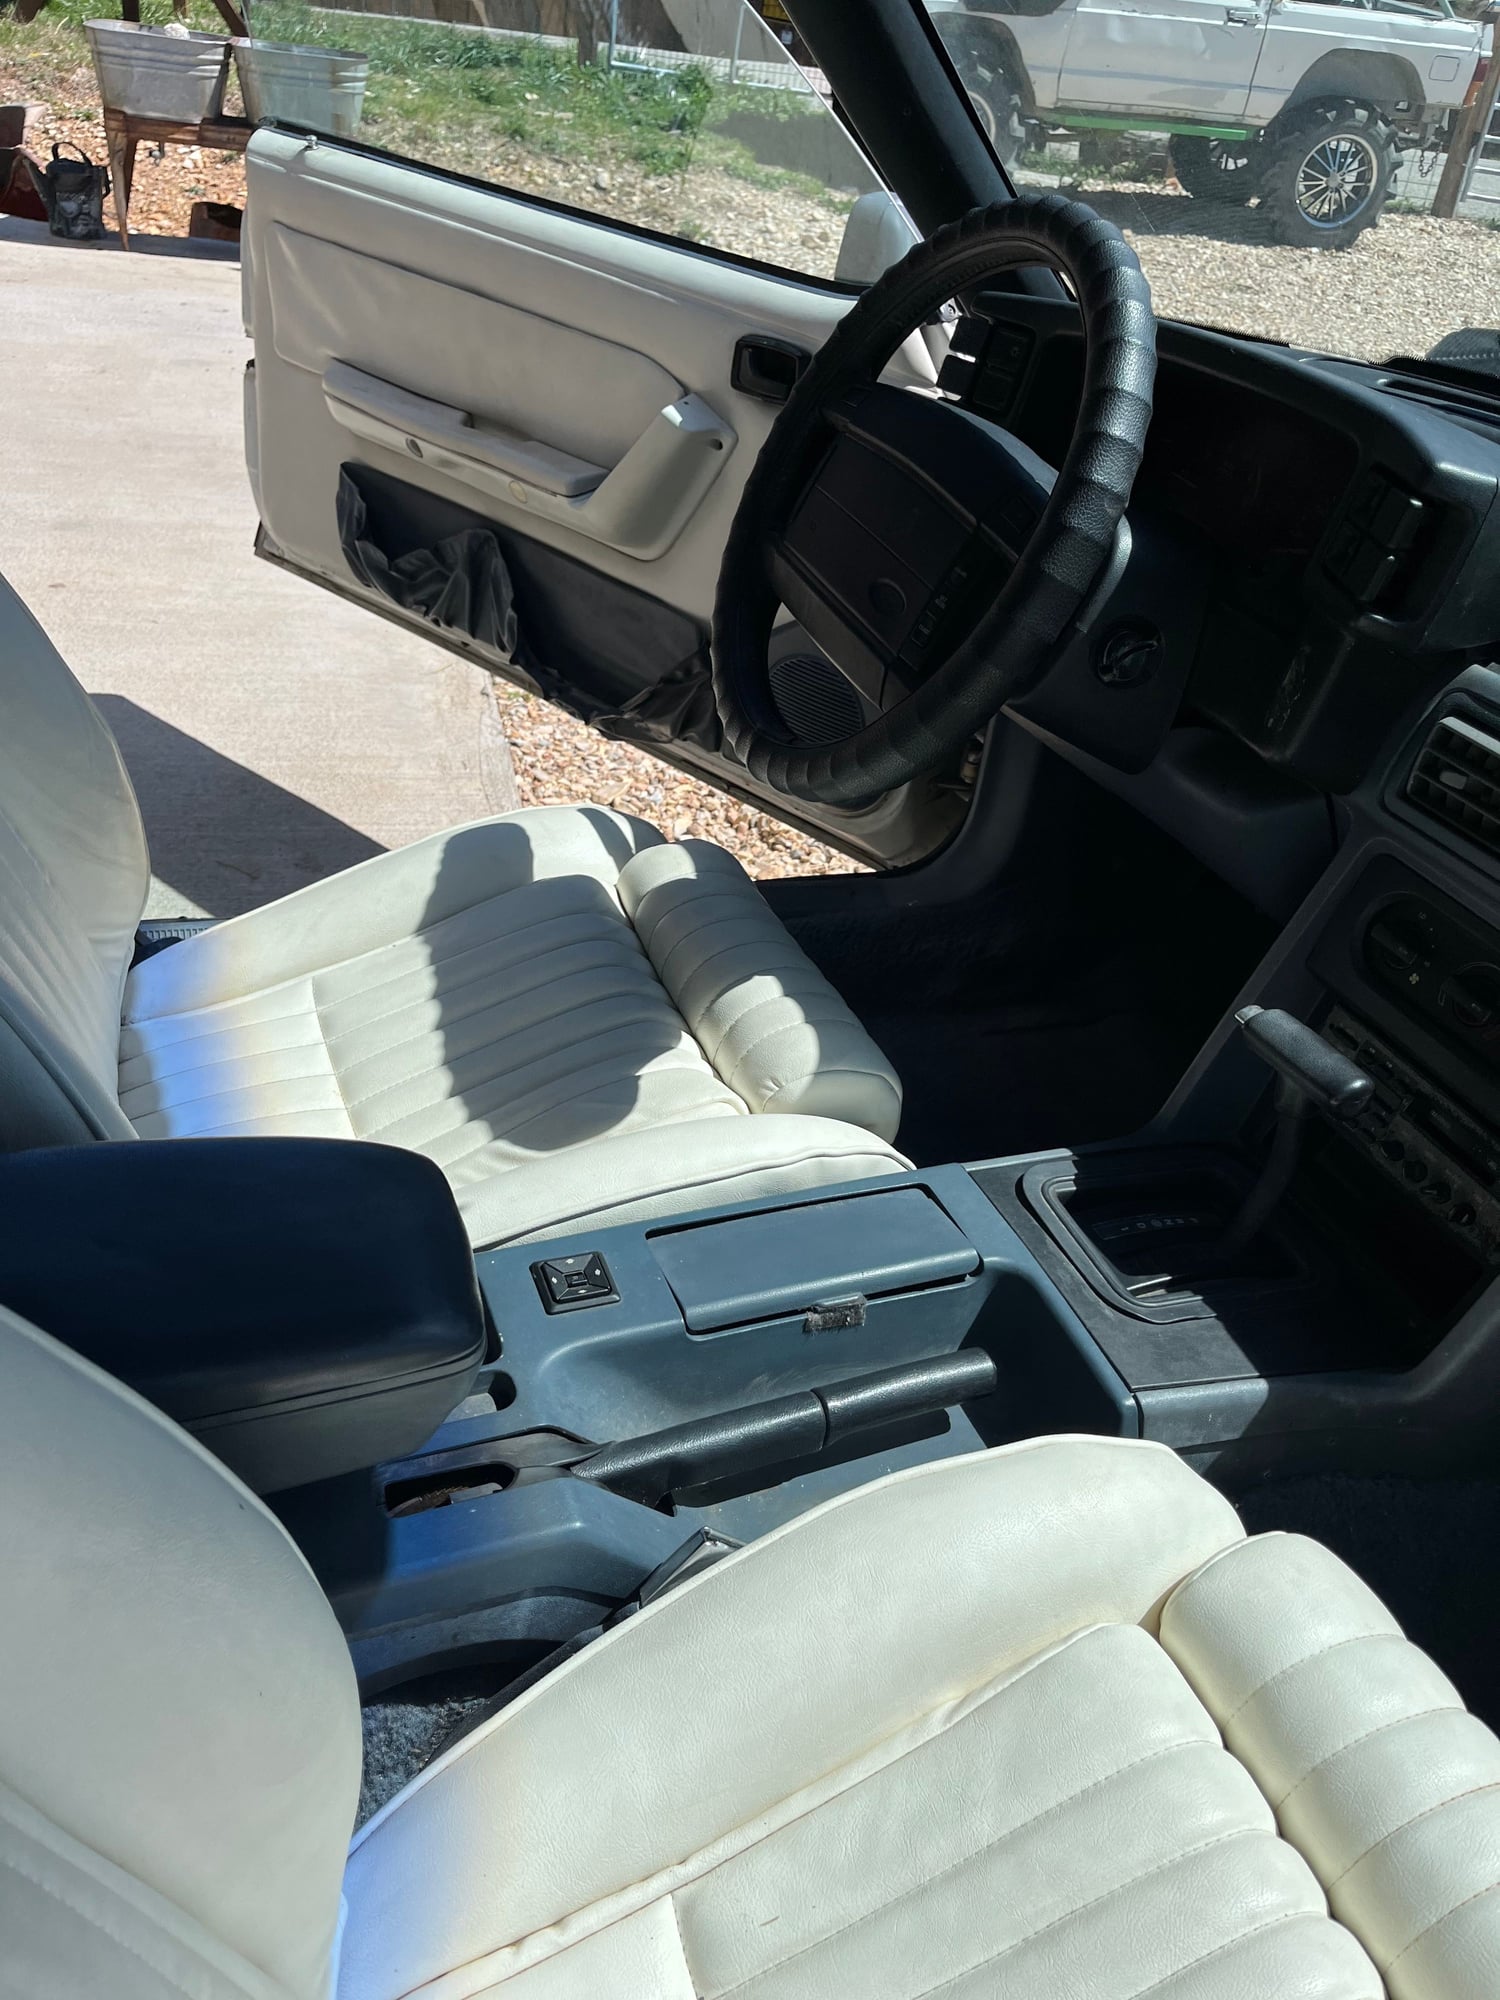 1990 Ford Mustang - 1990 Ford Mustang GT convertible - Used - VIN 1FACP44E1LF225265 - 25,000 Miles - 8 cyl - 2WD - Automatic - Convertible - White - Eureka Springs, AR 72632, United States